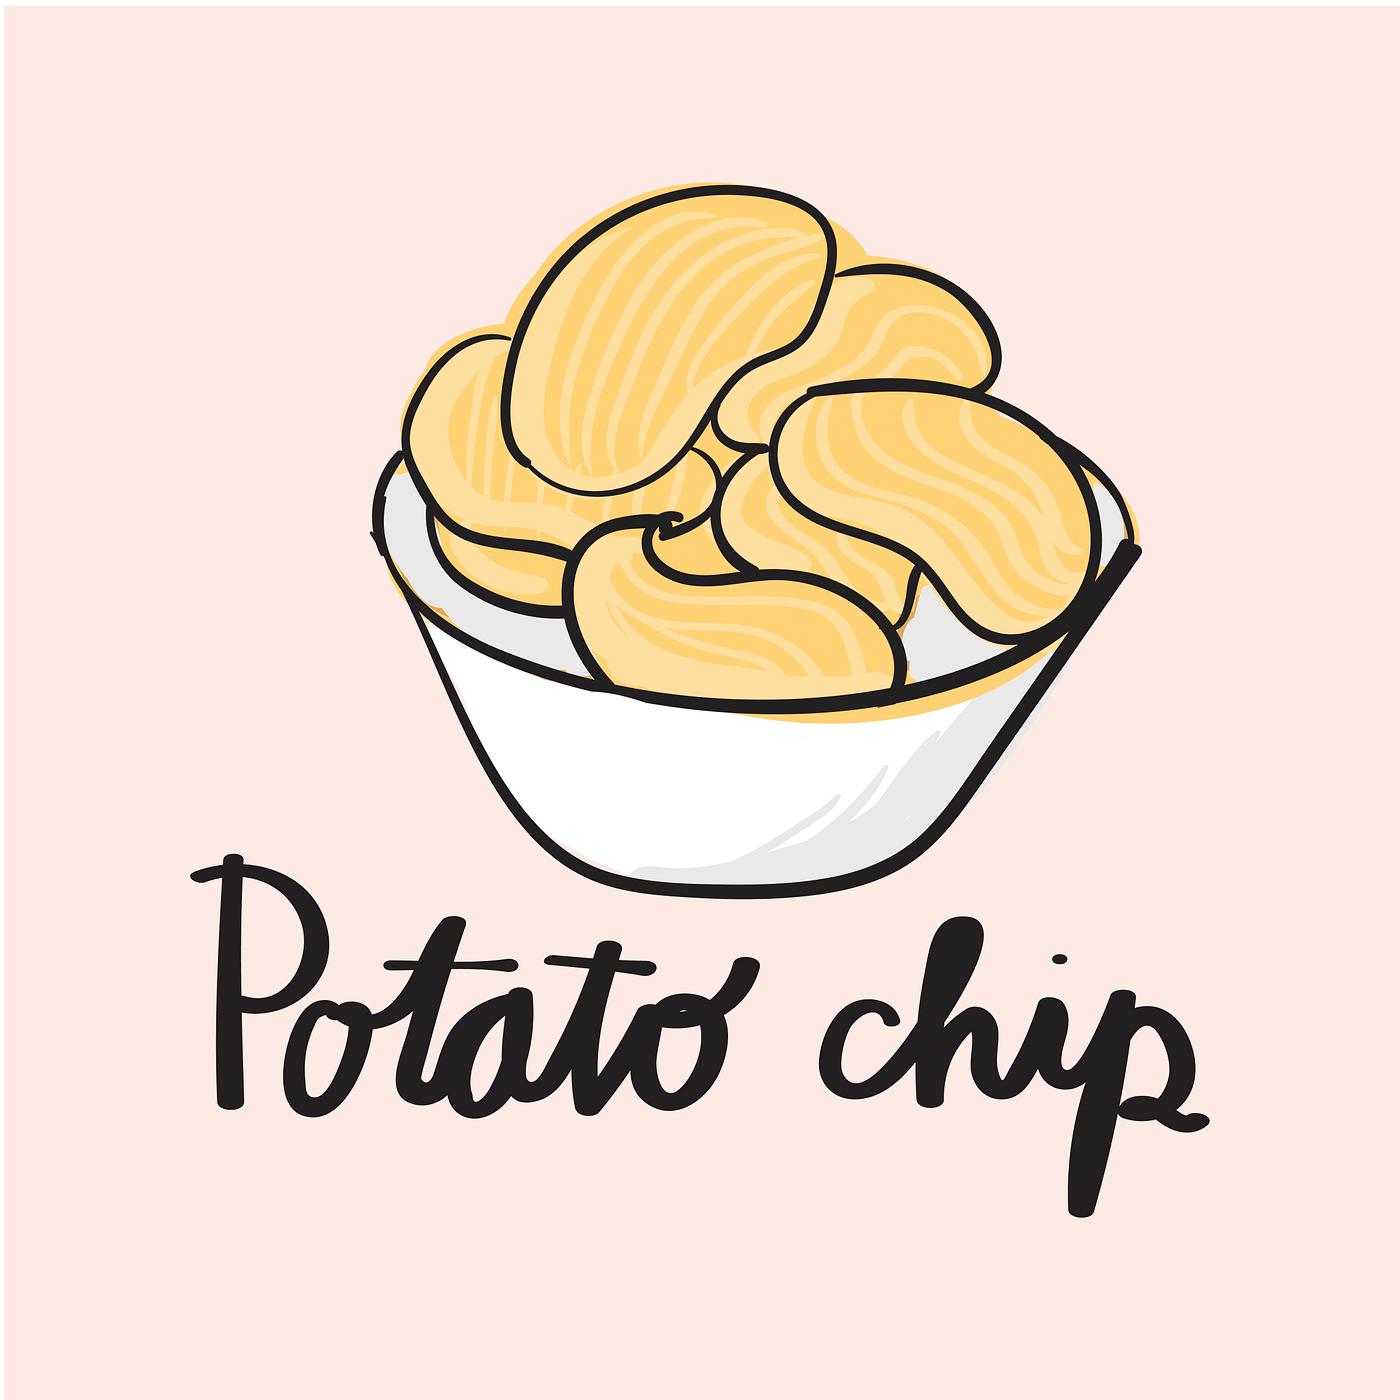 Illustration drawing style of potato chips | Free stock vector - 60145